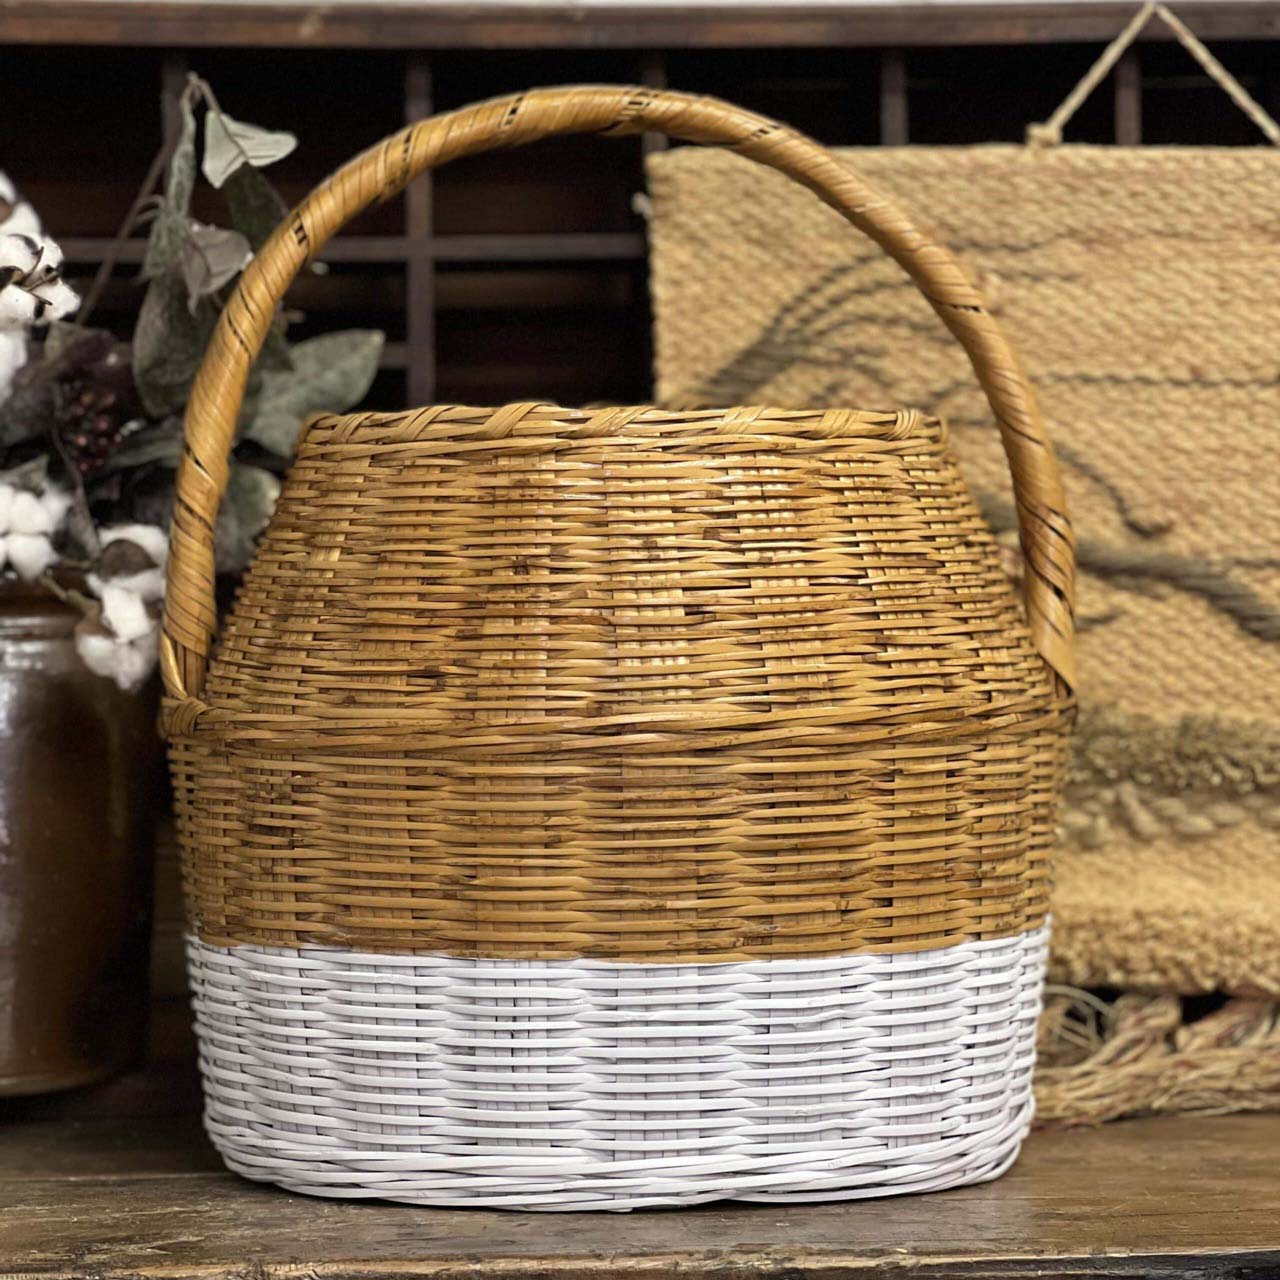 How to paint a basket. The Junk Parlor | Old stuff and cool junk for your home | Business Coach for Antique Dealers | thejunkparlor.com